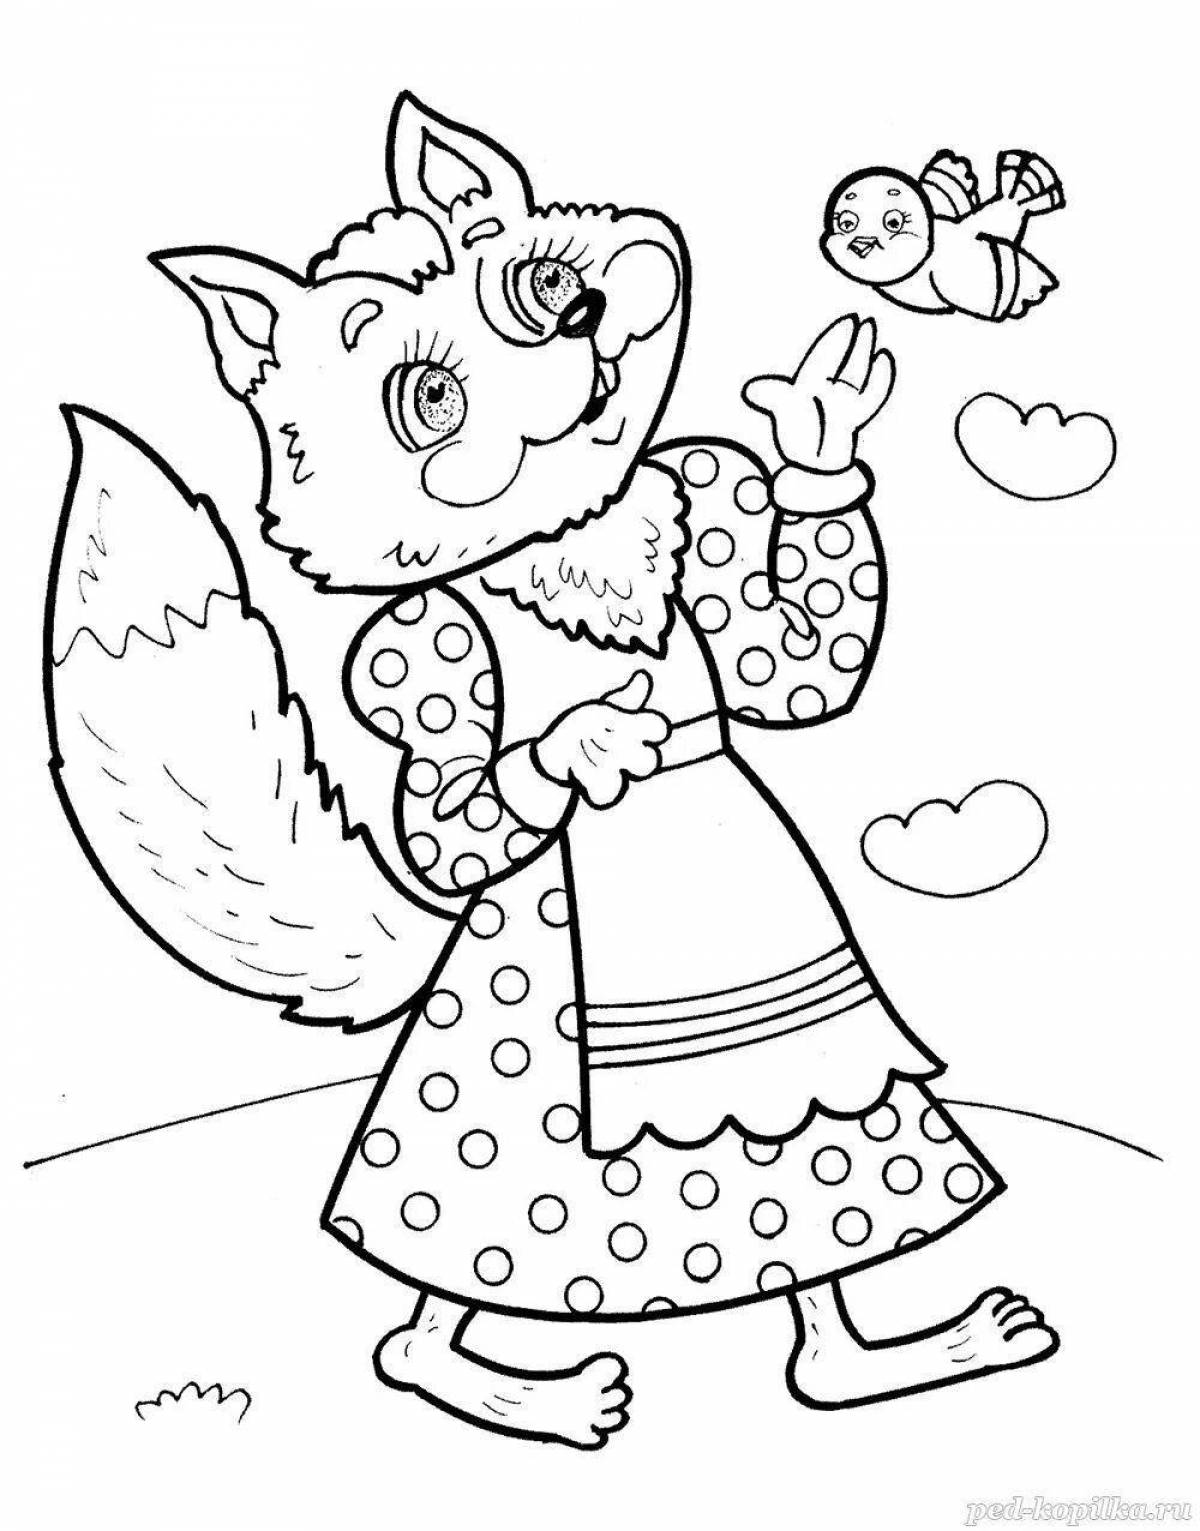 Live coloring fox from a fairy tale